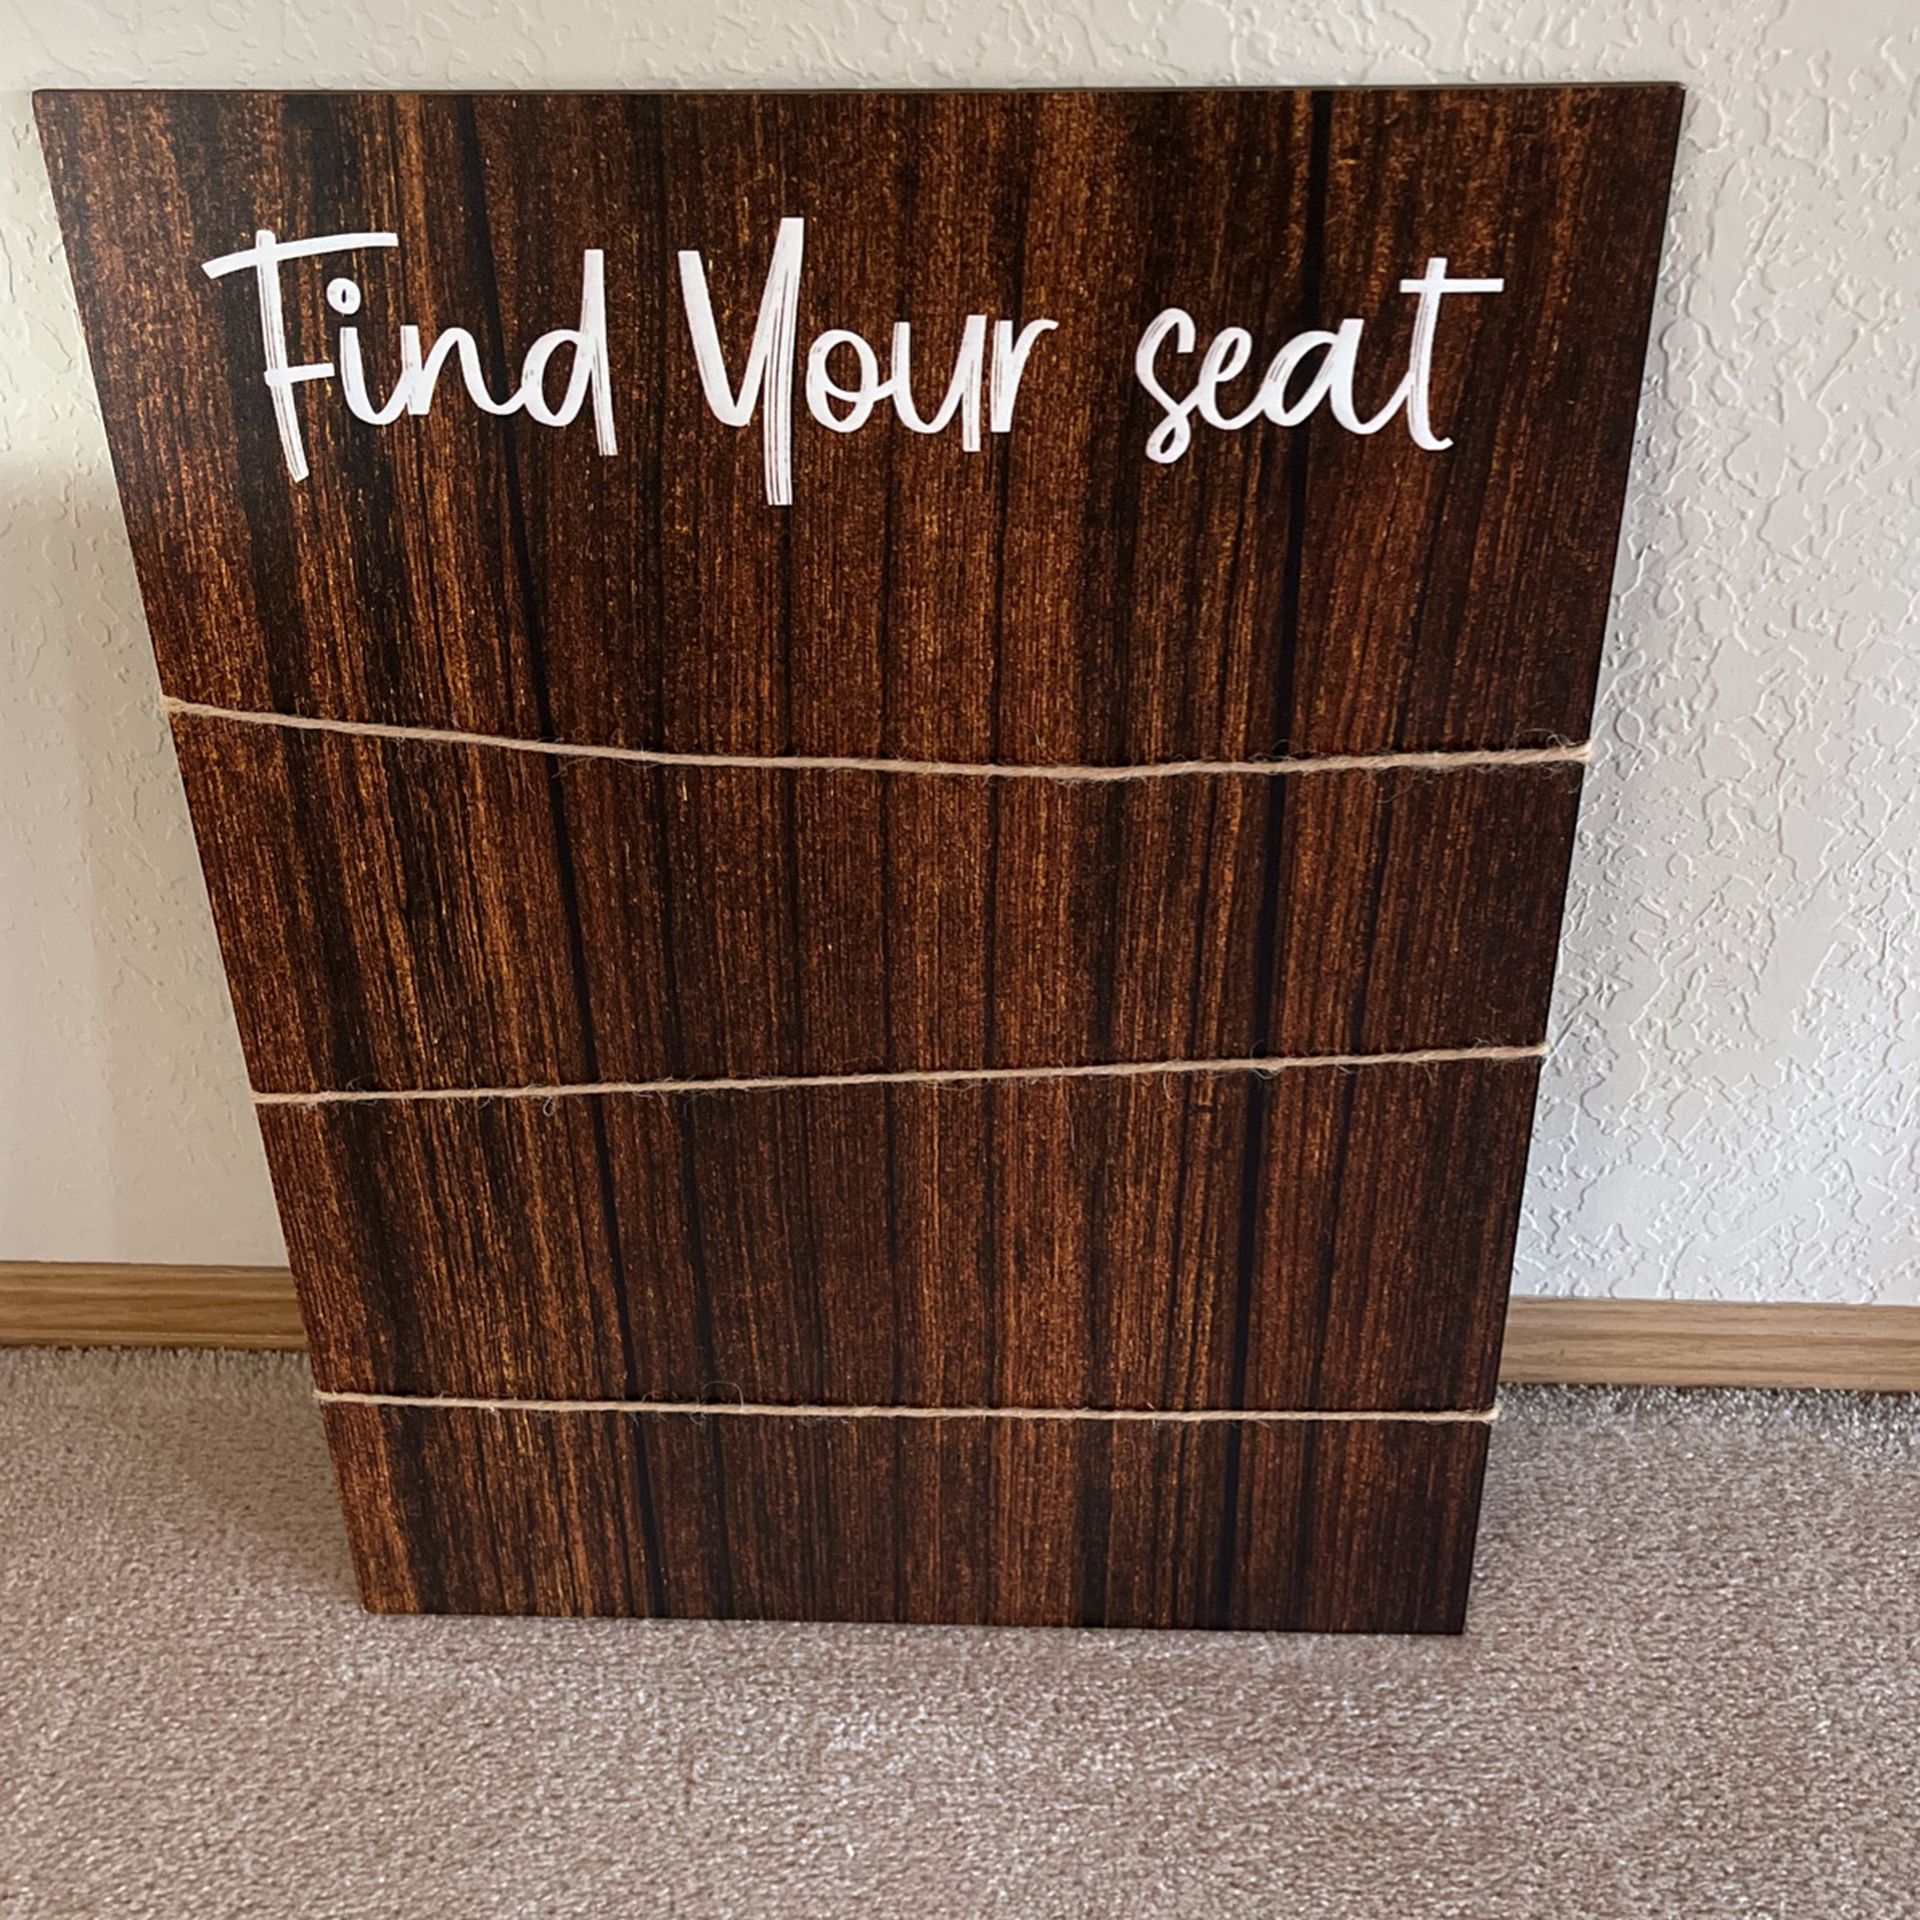 NEW Wedding Find Your Seat Sign